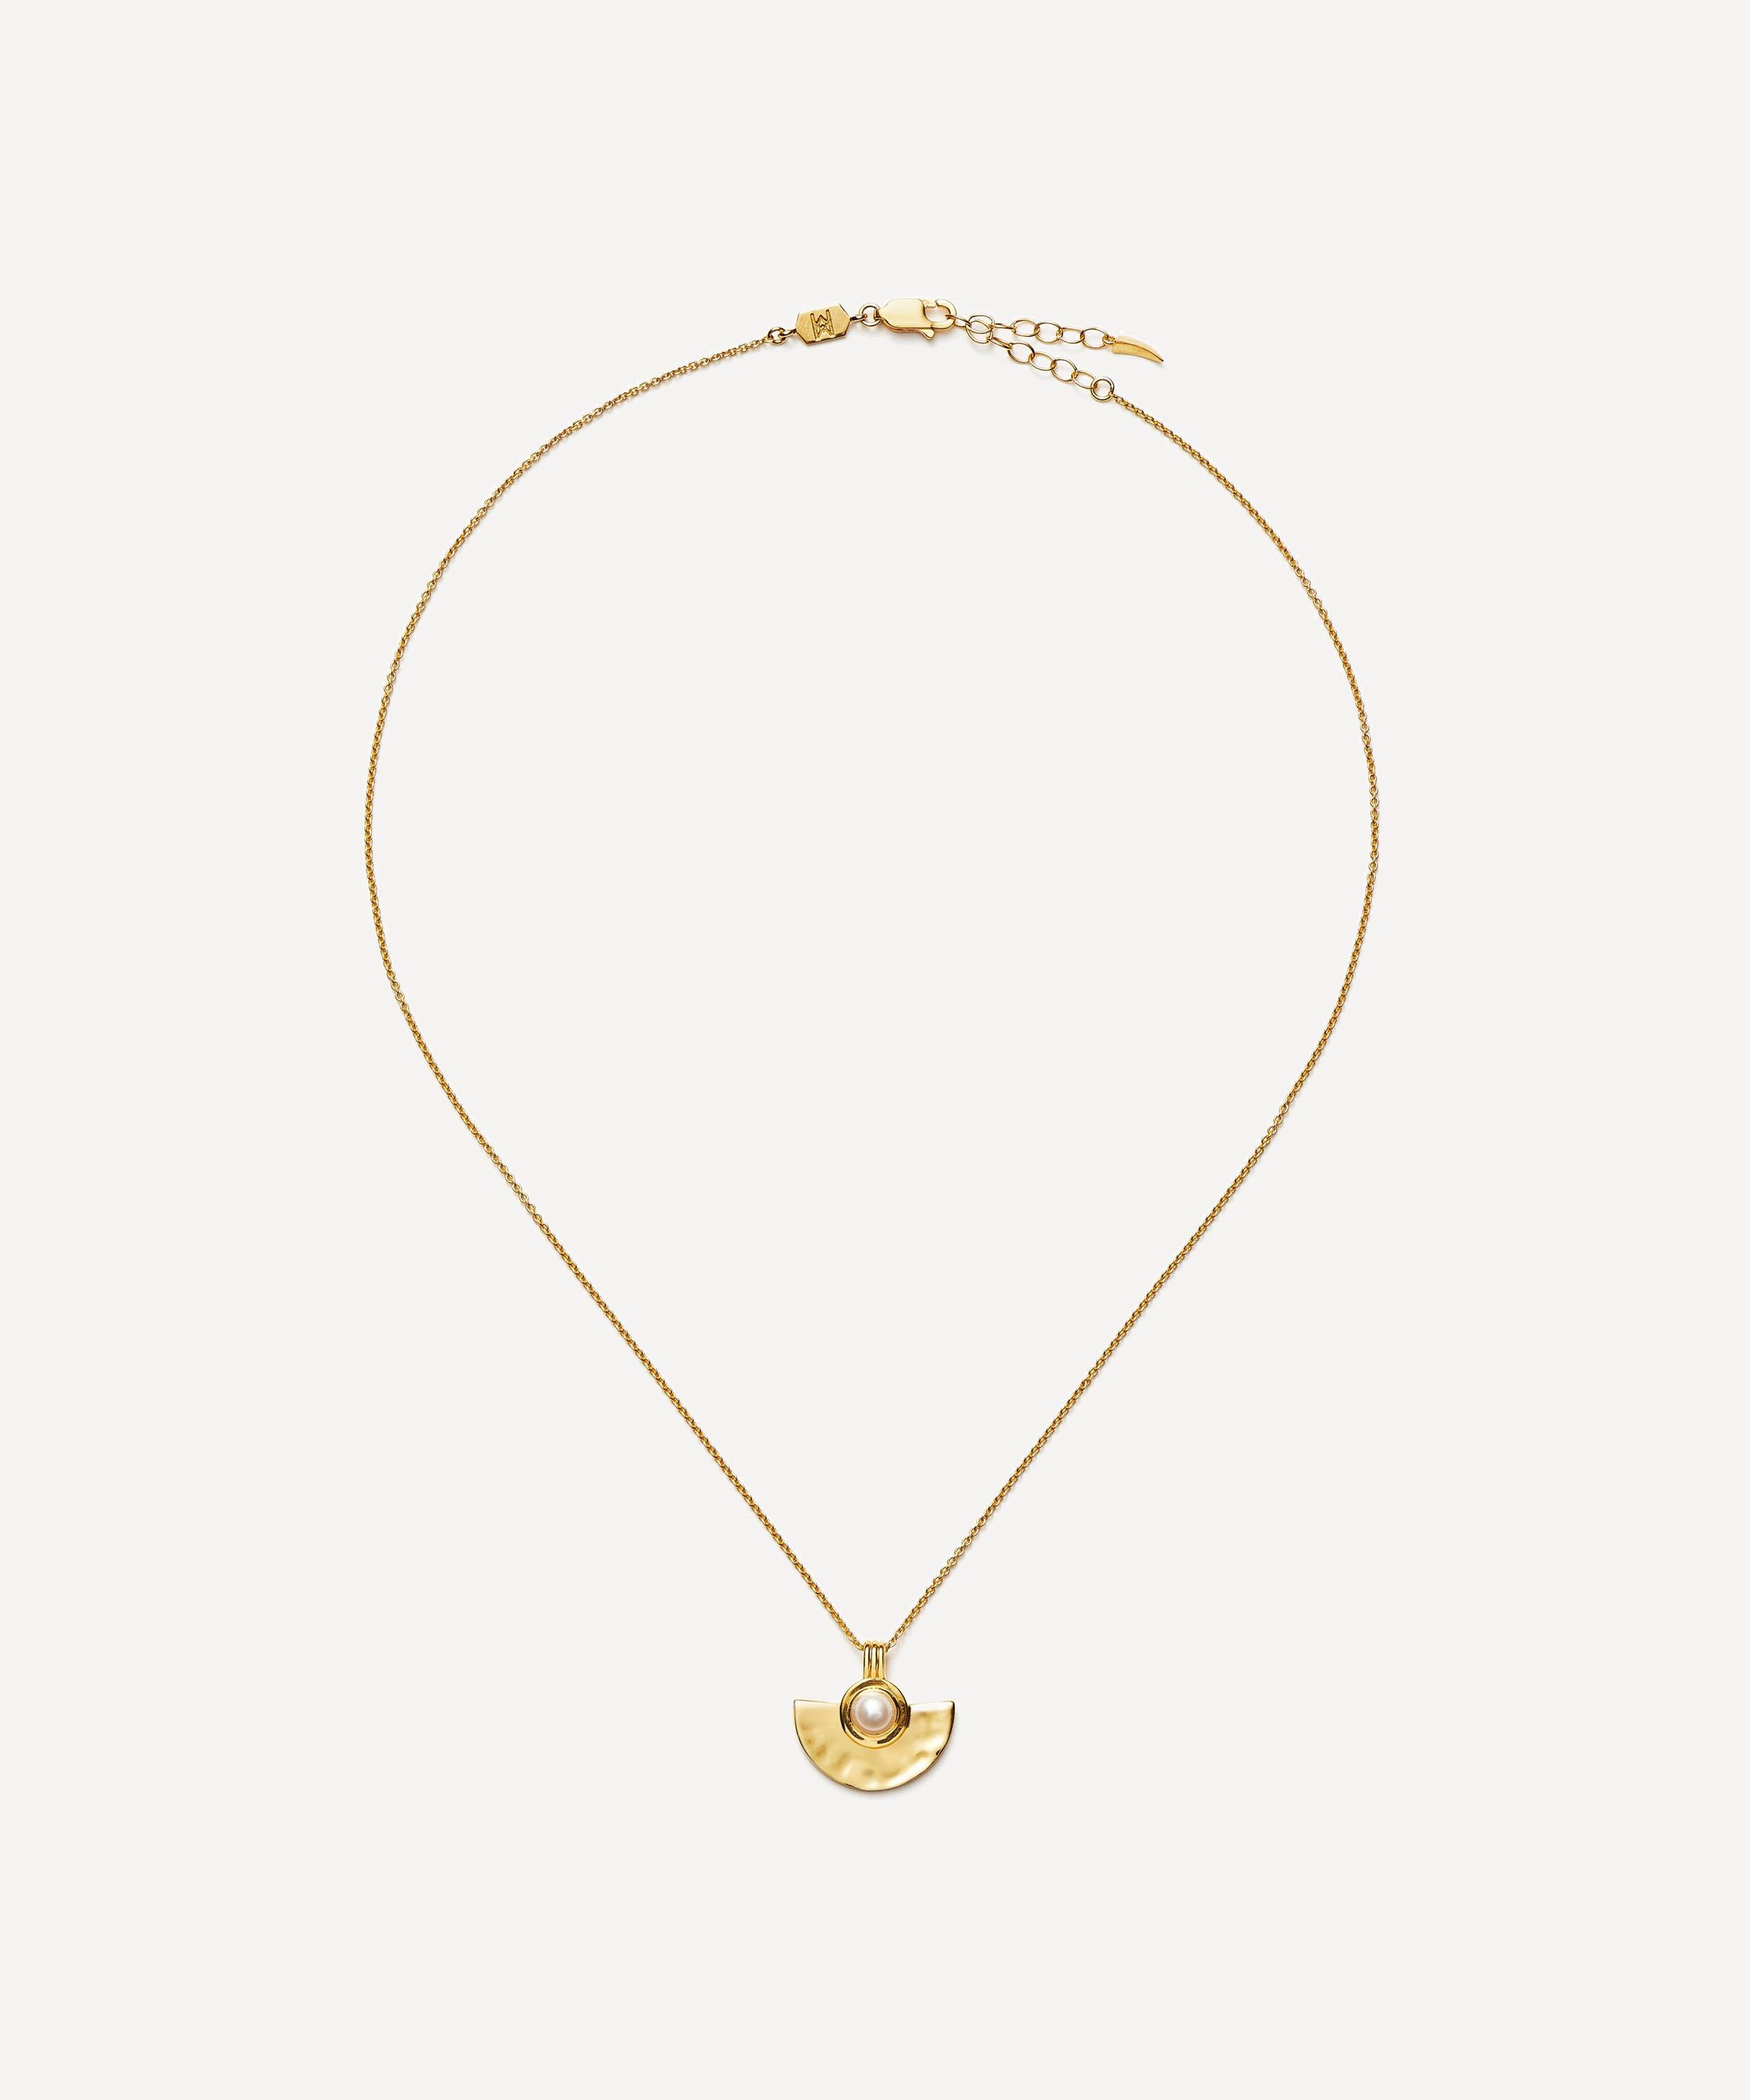 Missoma Zenyu Fan Chain Necklace Set 18ct Gold Plated Vermeil